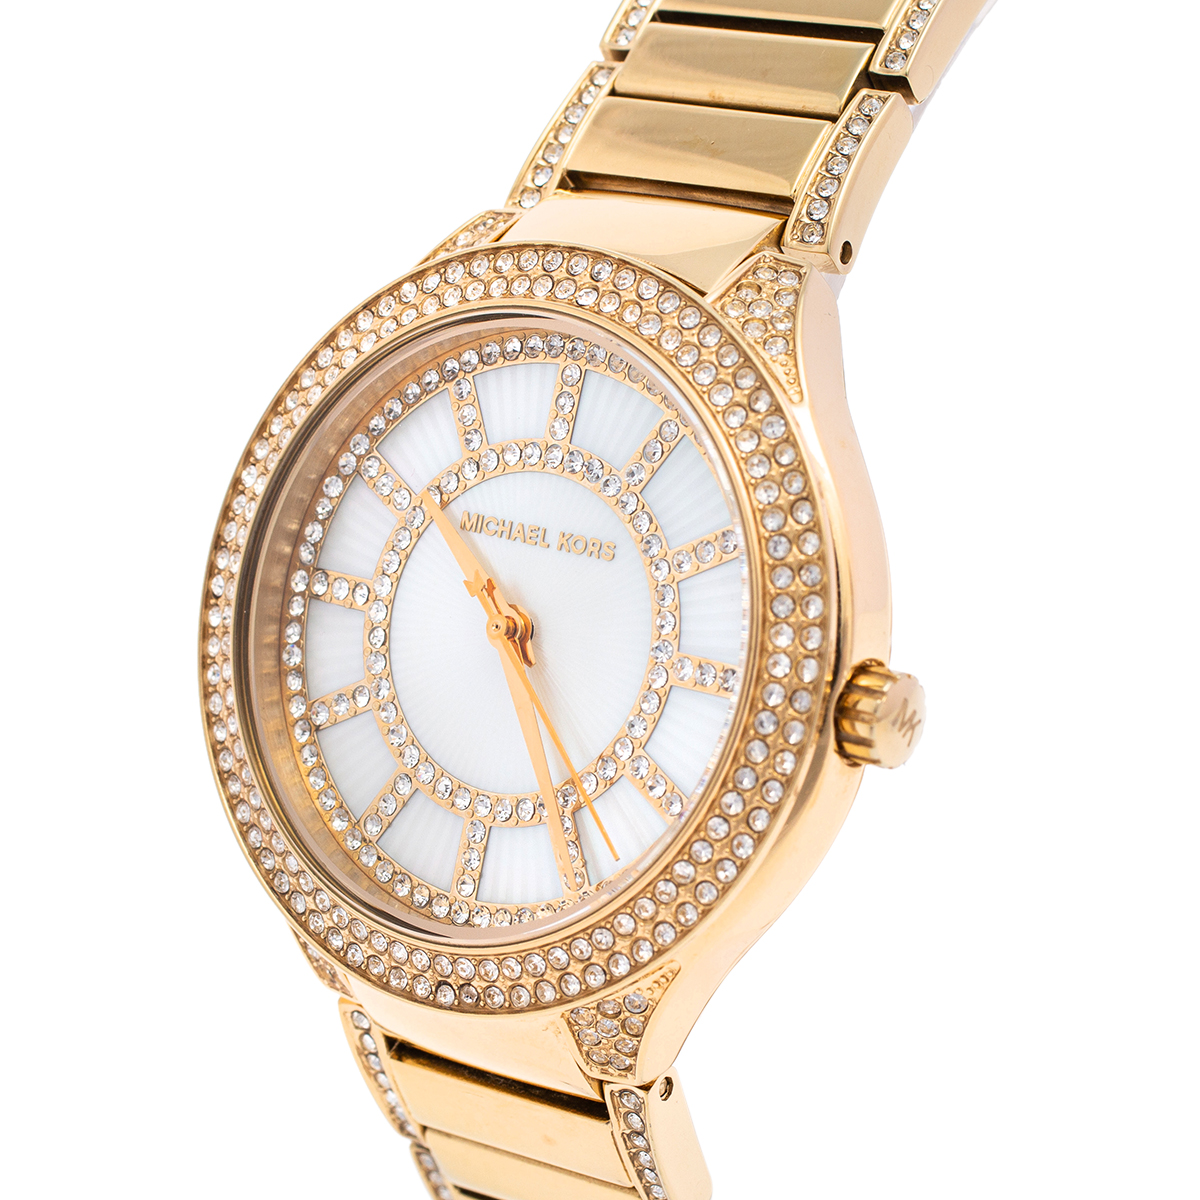 

Michael Kors Mother of Pearl Gold Tone Stainless Steel Kerry MK3312 Women's Wristwatch, White